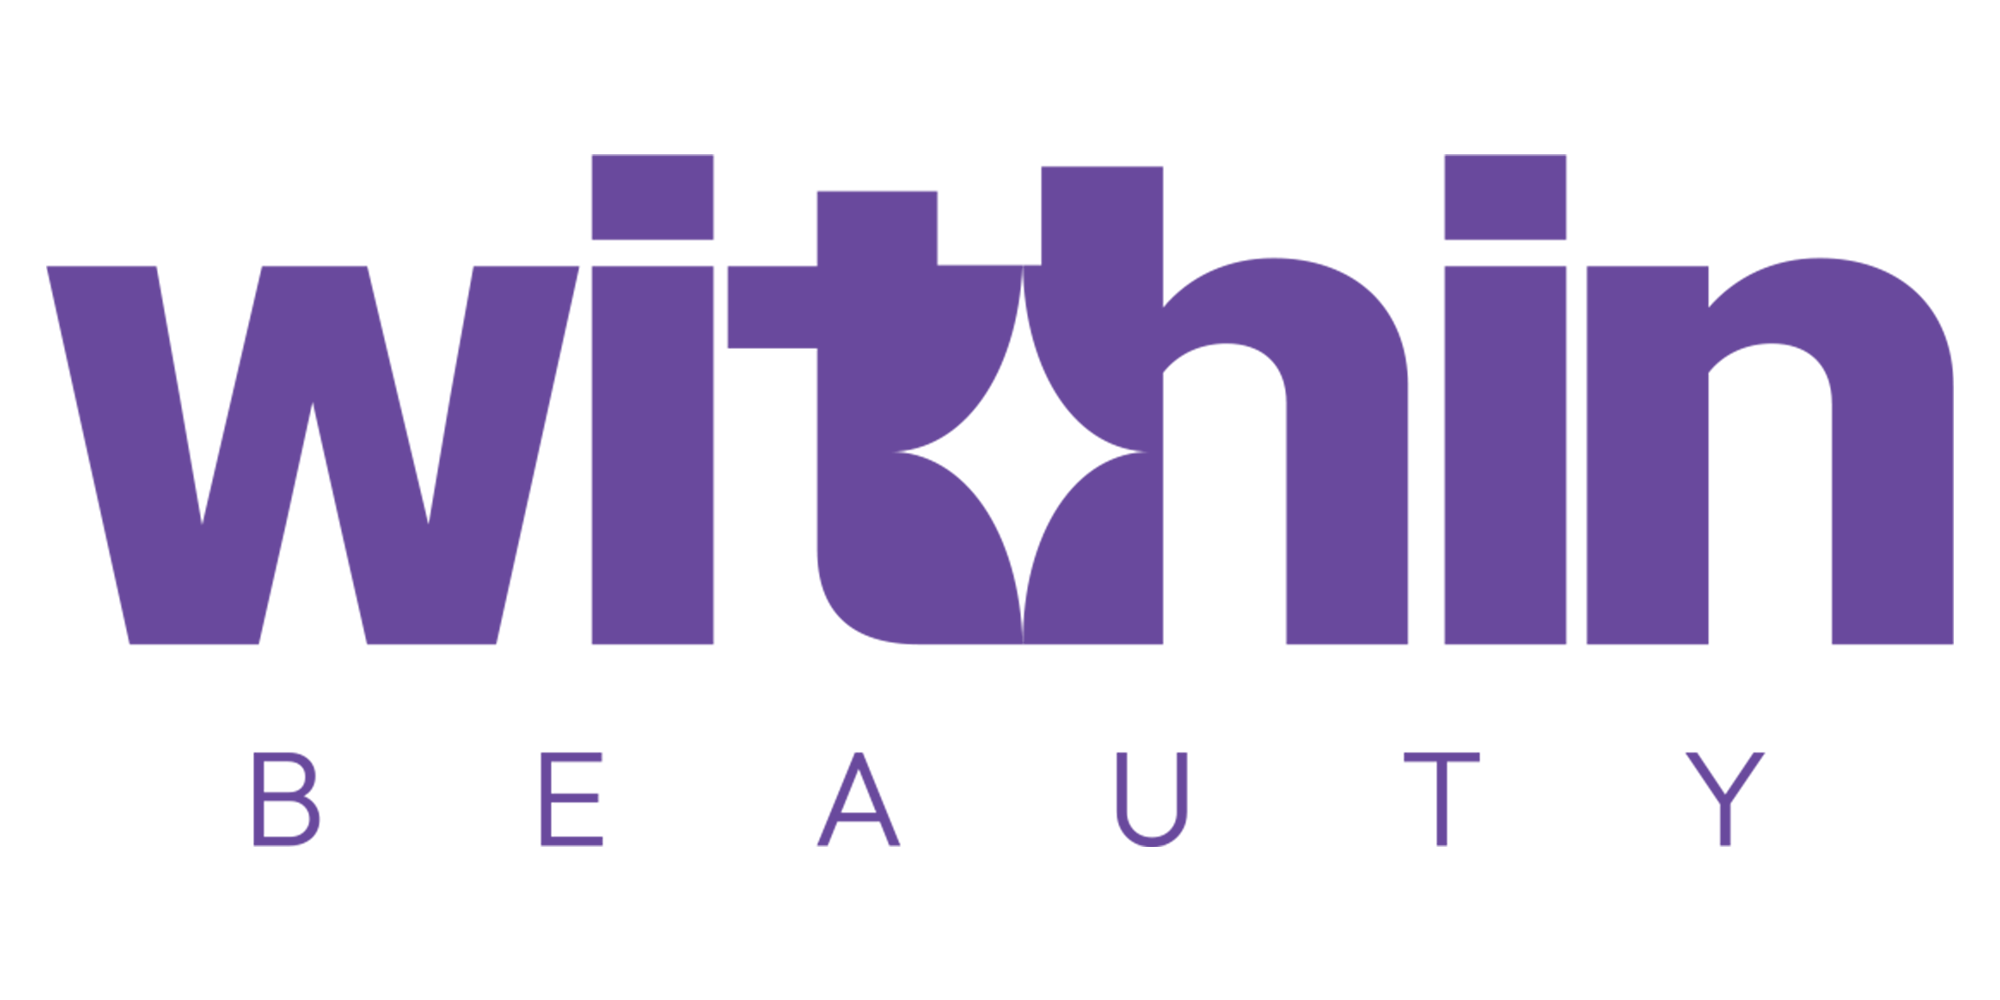 Within Beauty